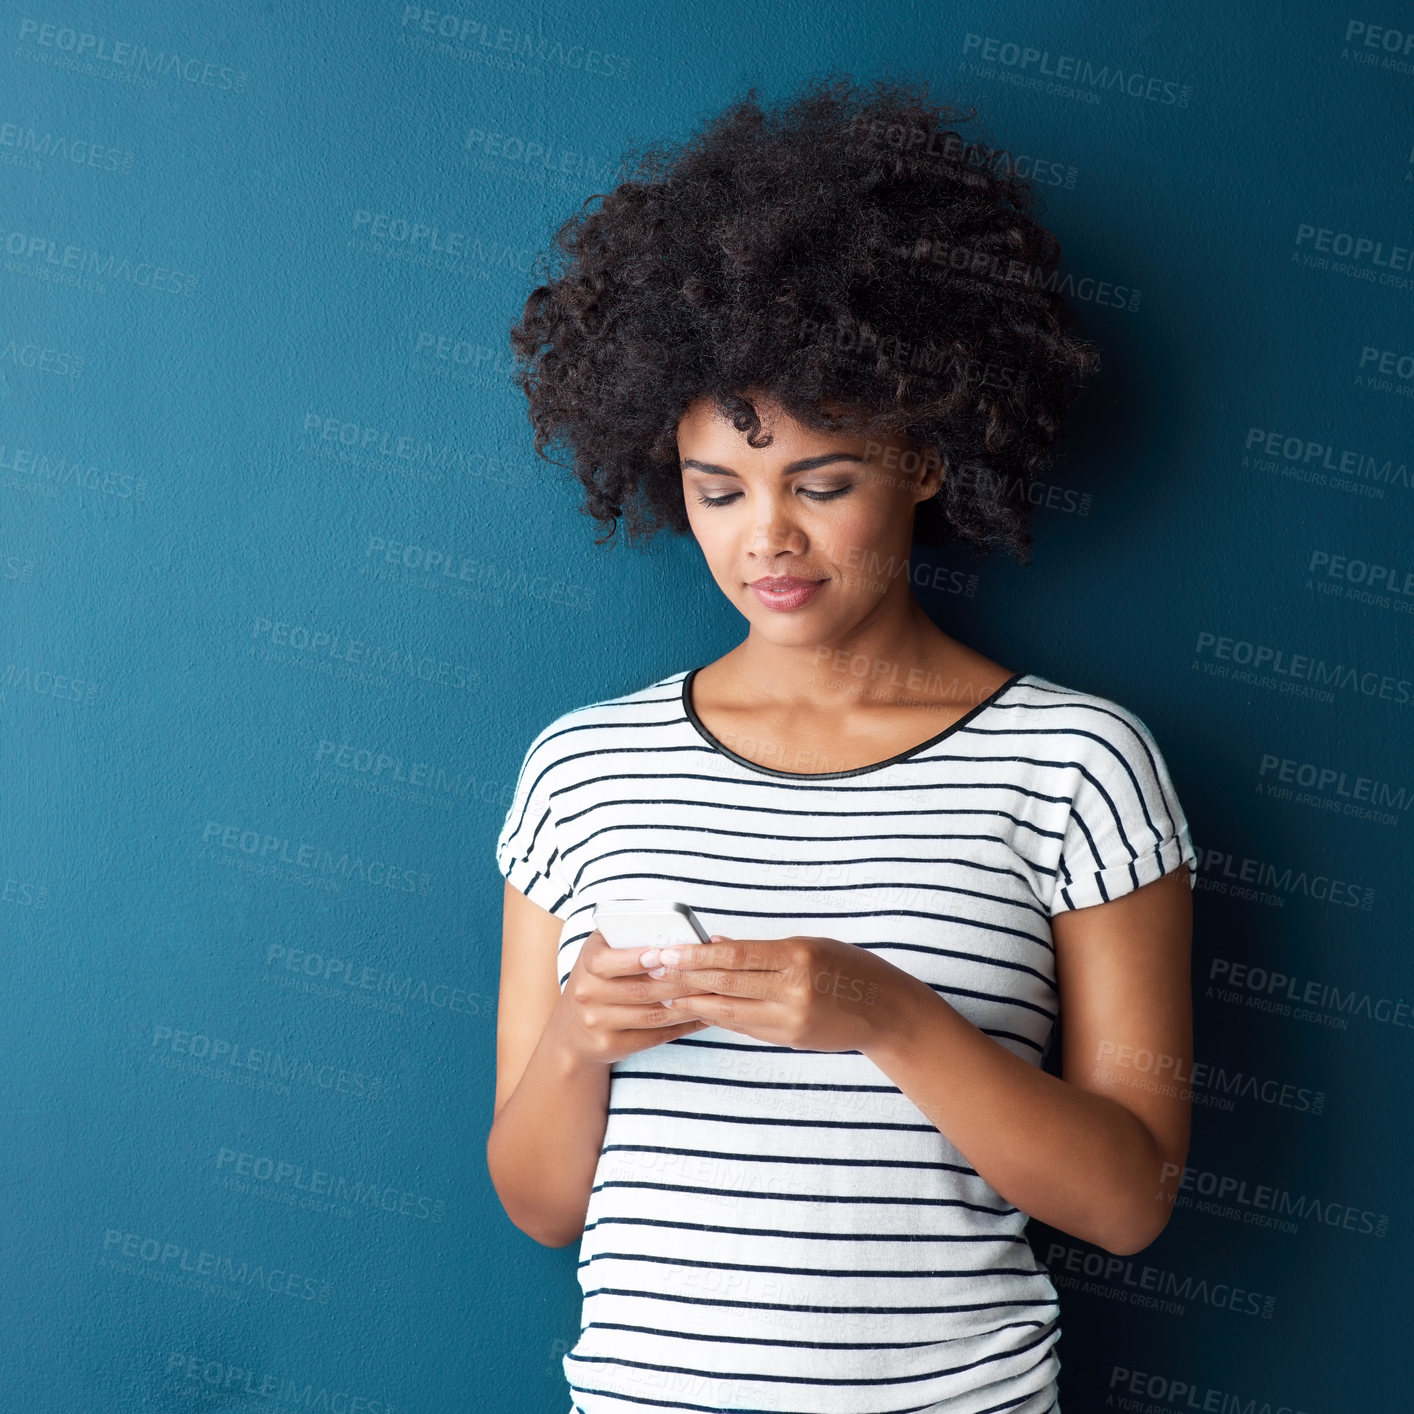 Buy stock photo Studio shot of an attractive young woman using a cellphone against a blue background